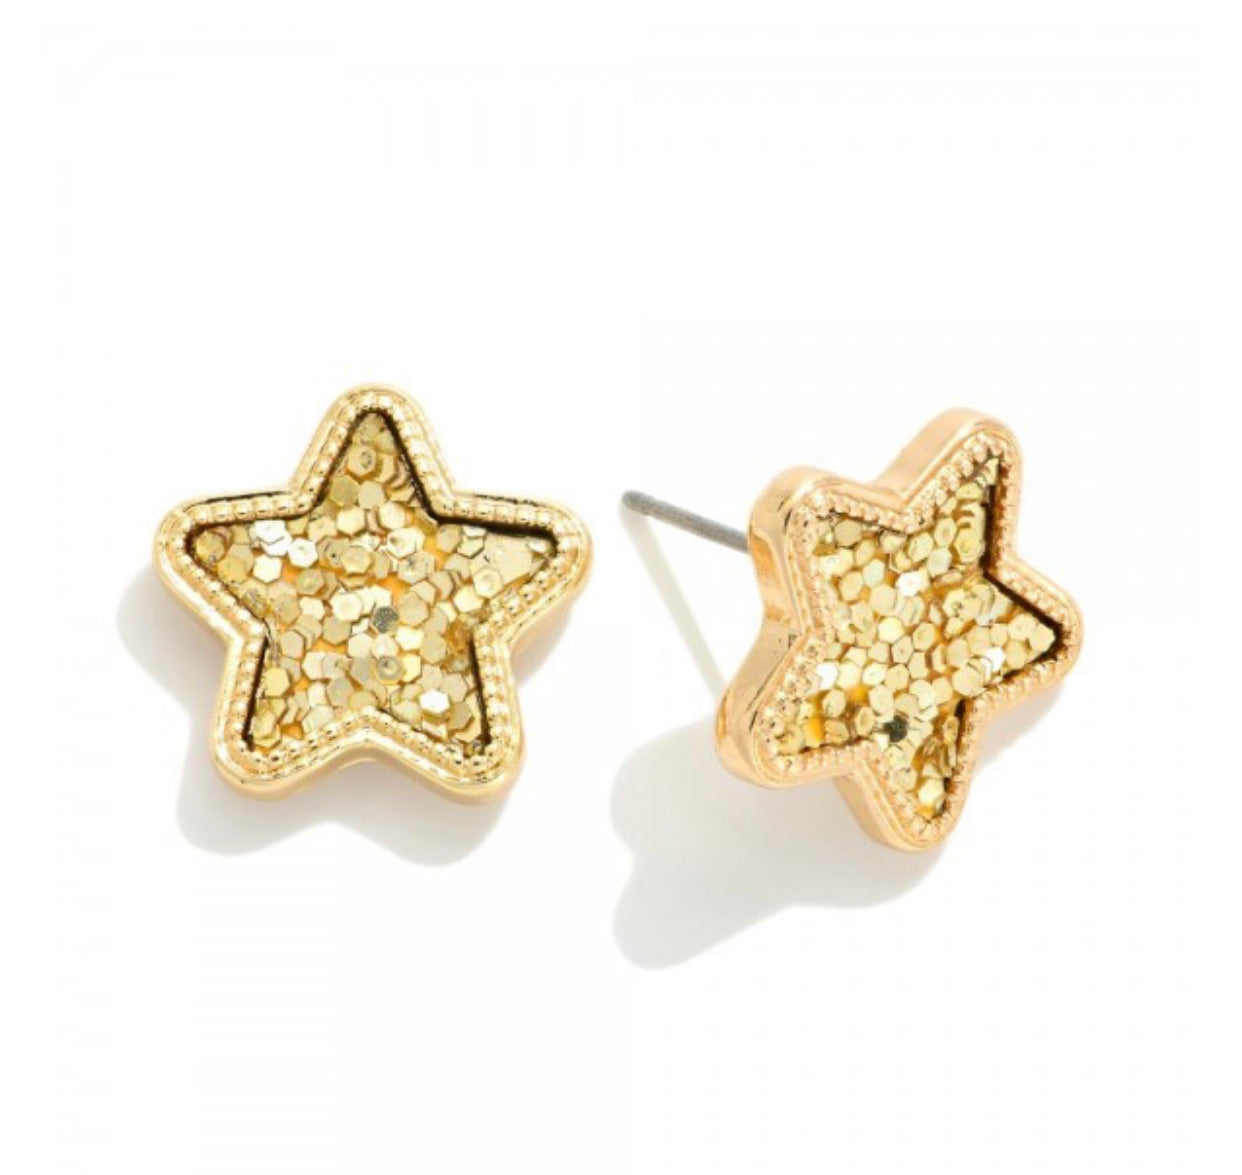 Glittery Star Earrings-250 Jewelry-The Lovely Closet-The Lovely Closet, Women's Fashion Boutique in Alexandria, KY